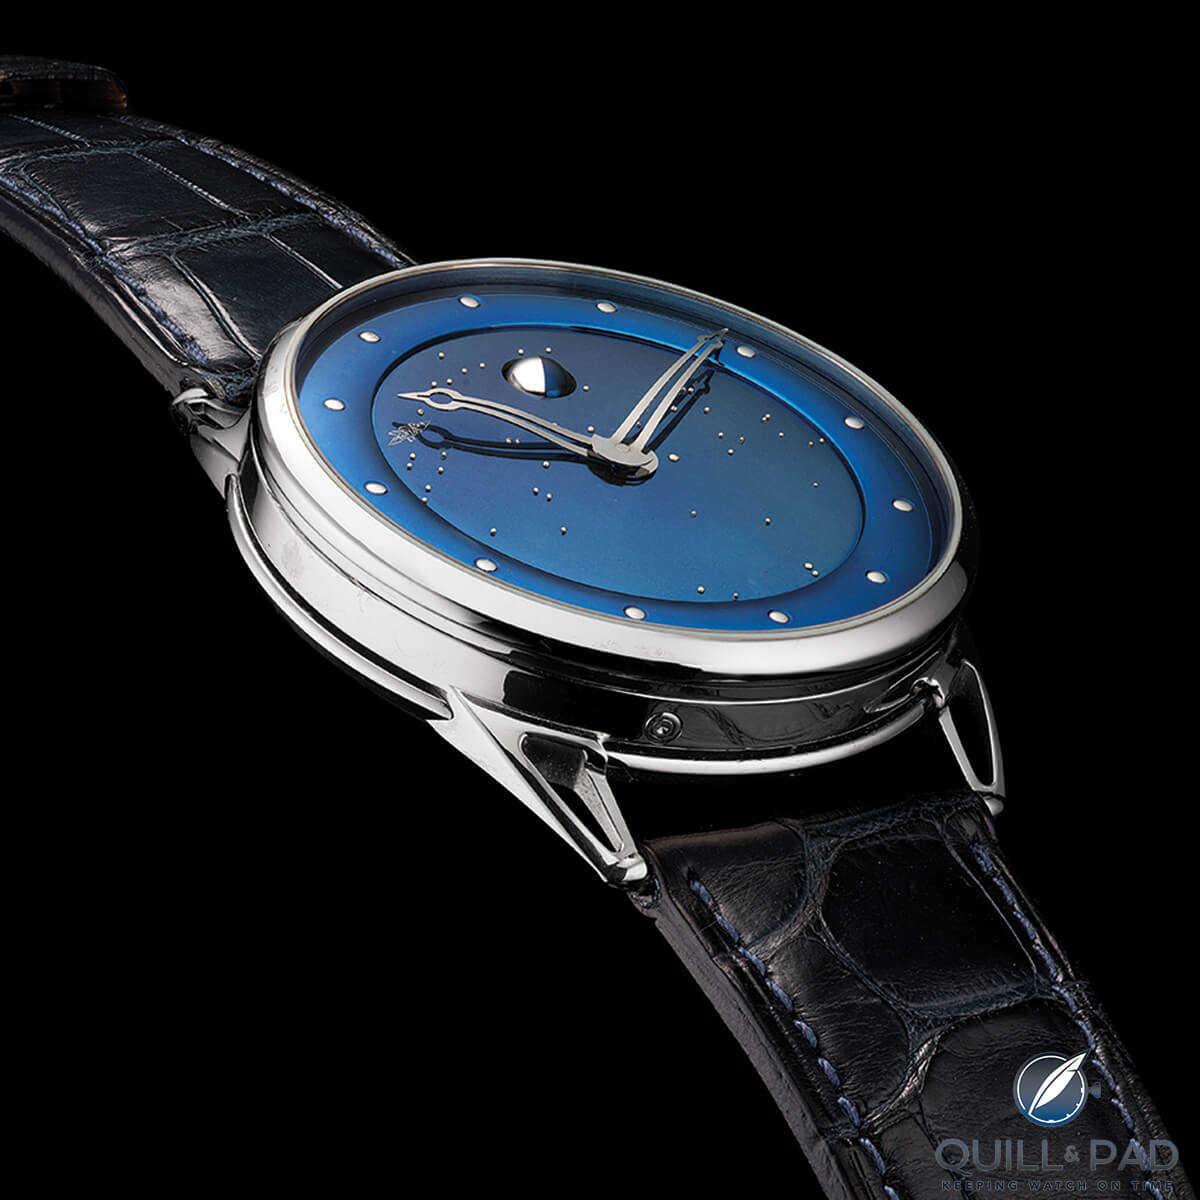 Lot 1022: De Bethune DB25 with customised star constellation of Laurent Picciotto's hometown on the dial